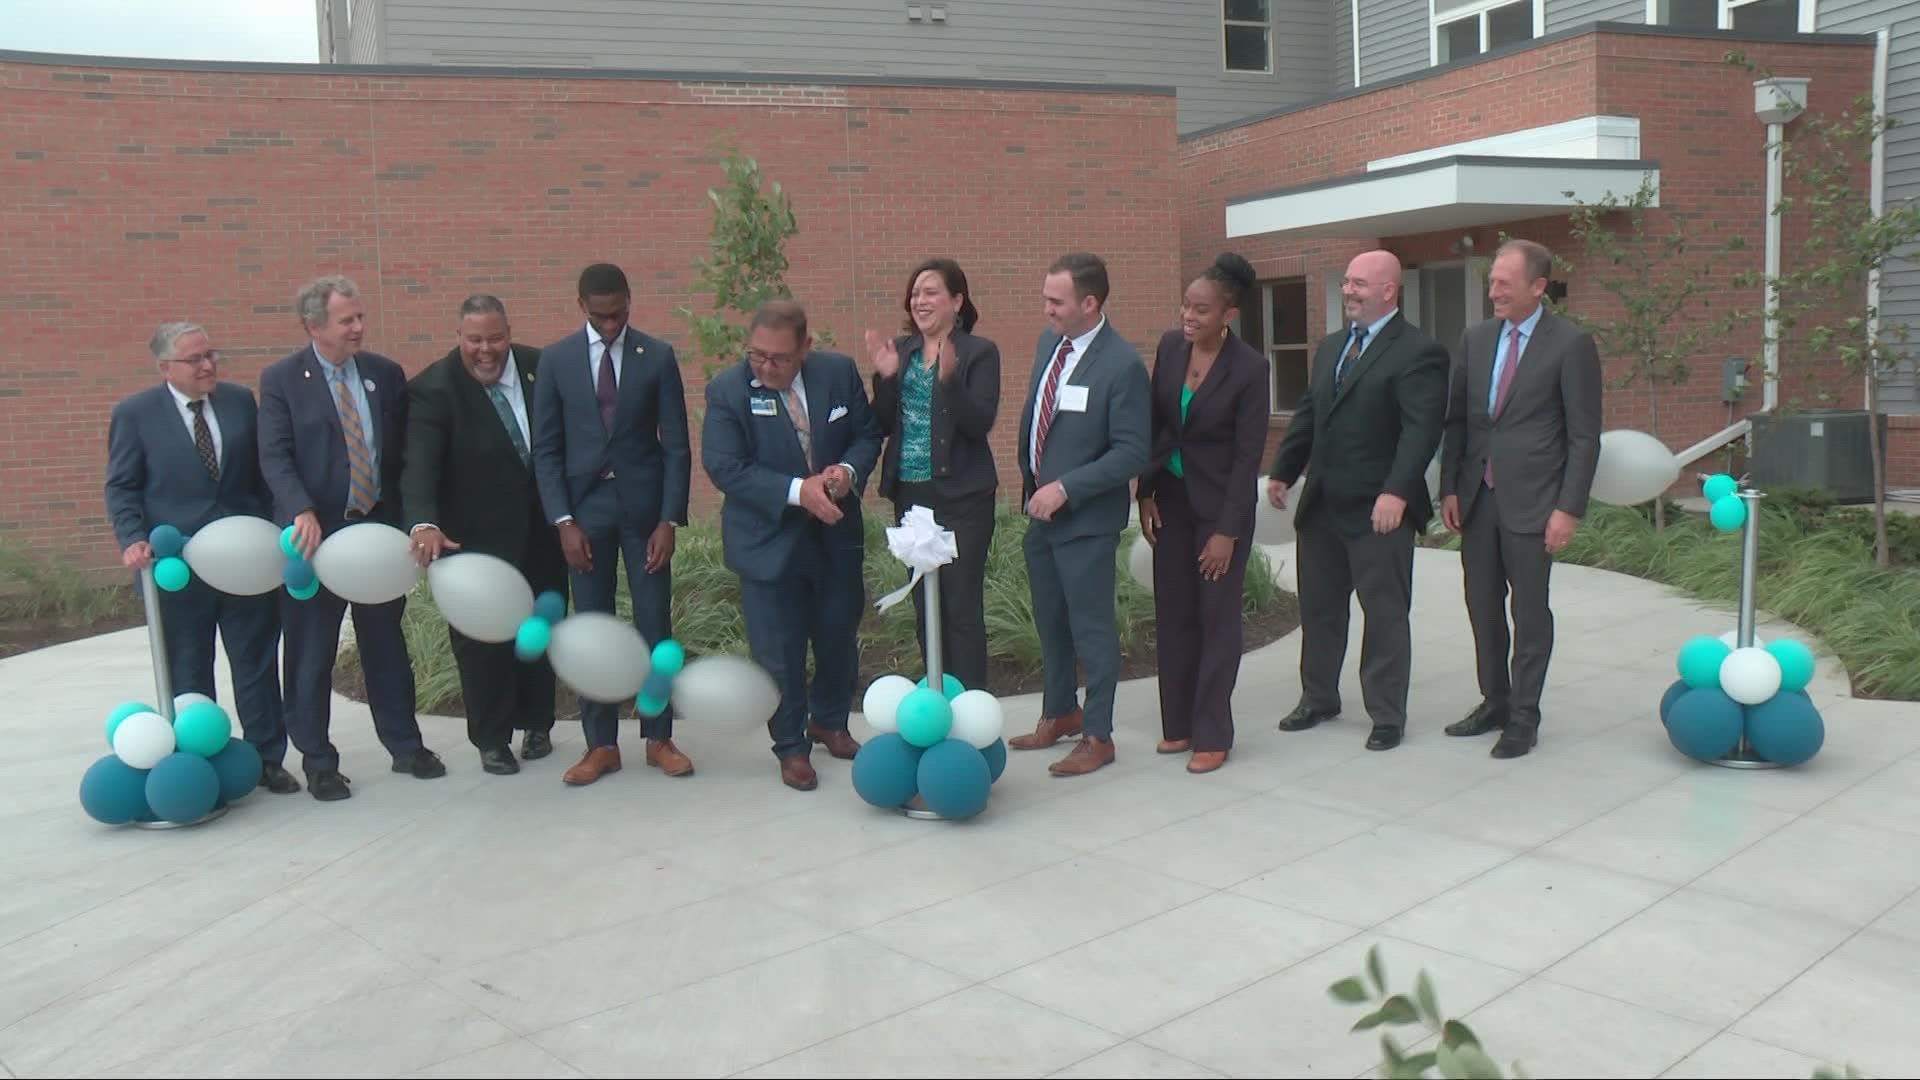 MetroHealth cut the ribbon today on a complex that will house 72 families in the Clark-Fulton neighborhood, home to Cleveland's densest population of Hispanic people